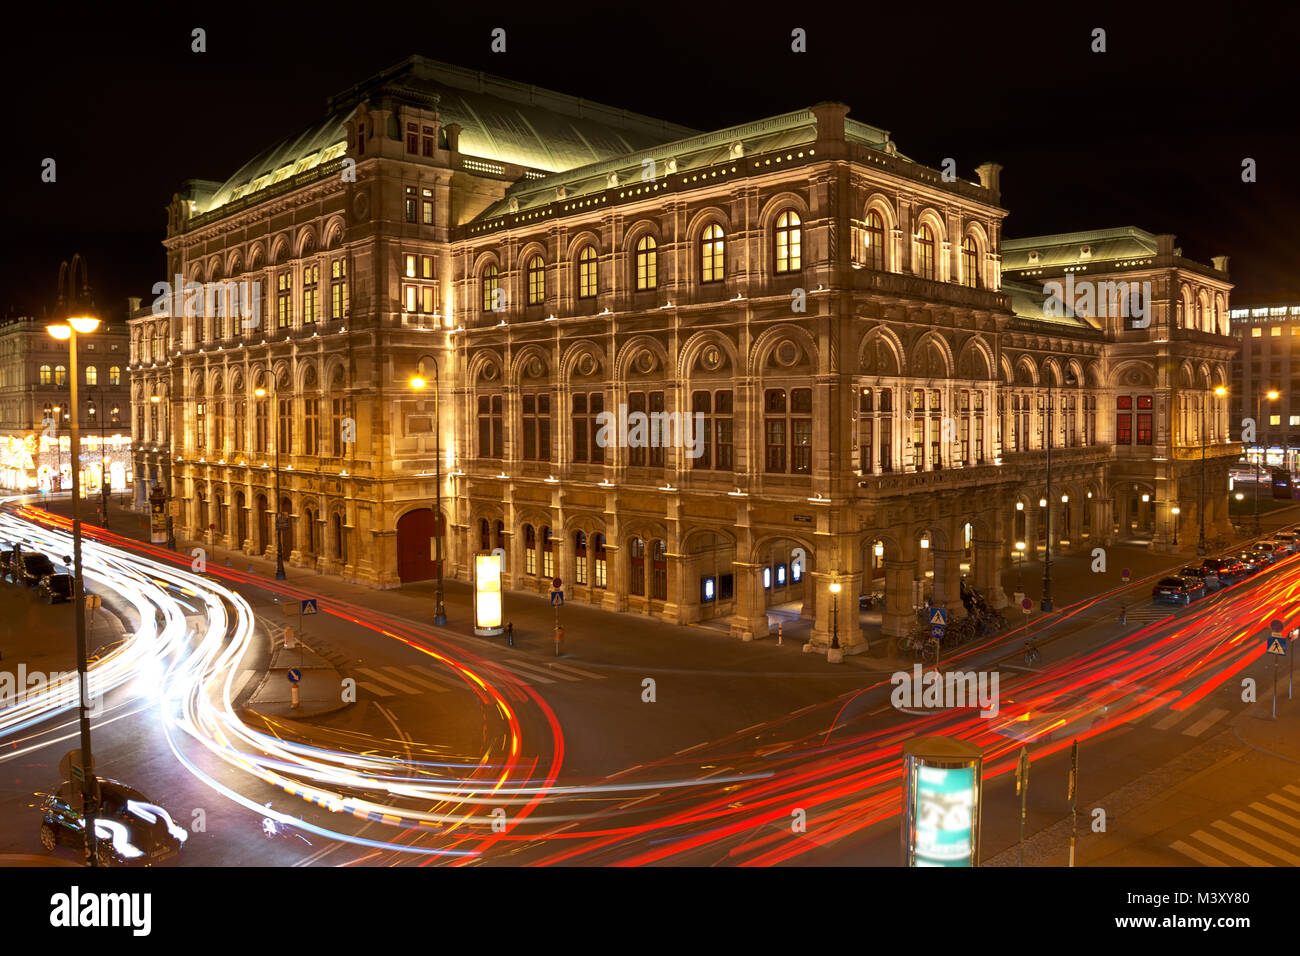 Vienna State Opera at night with car light trails on the Vienna Ring street. Stock Photo